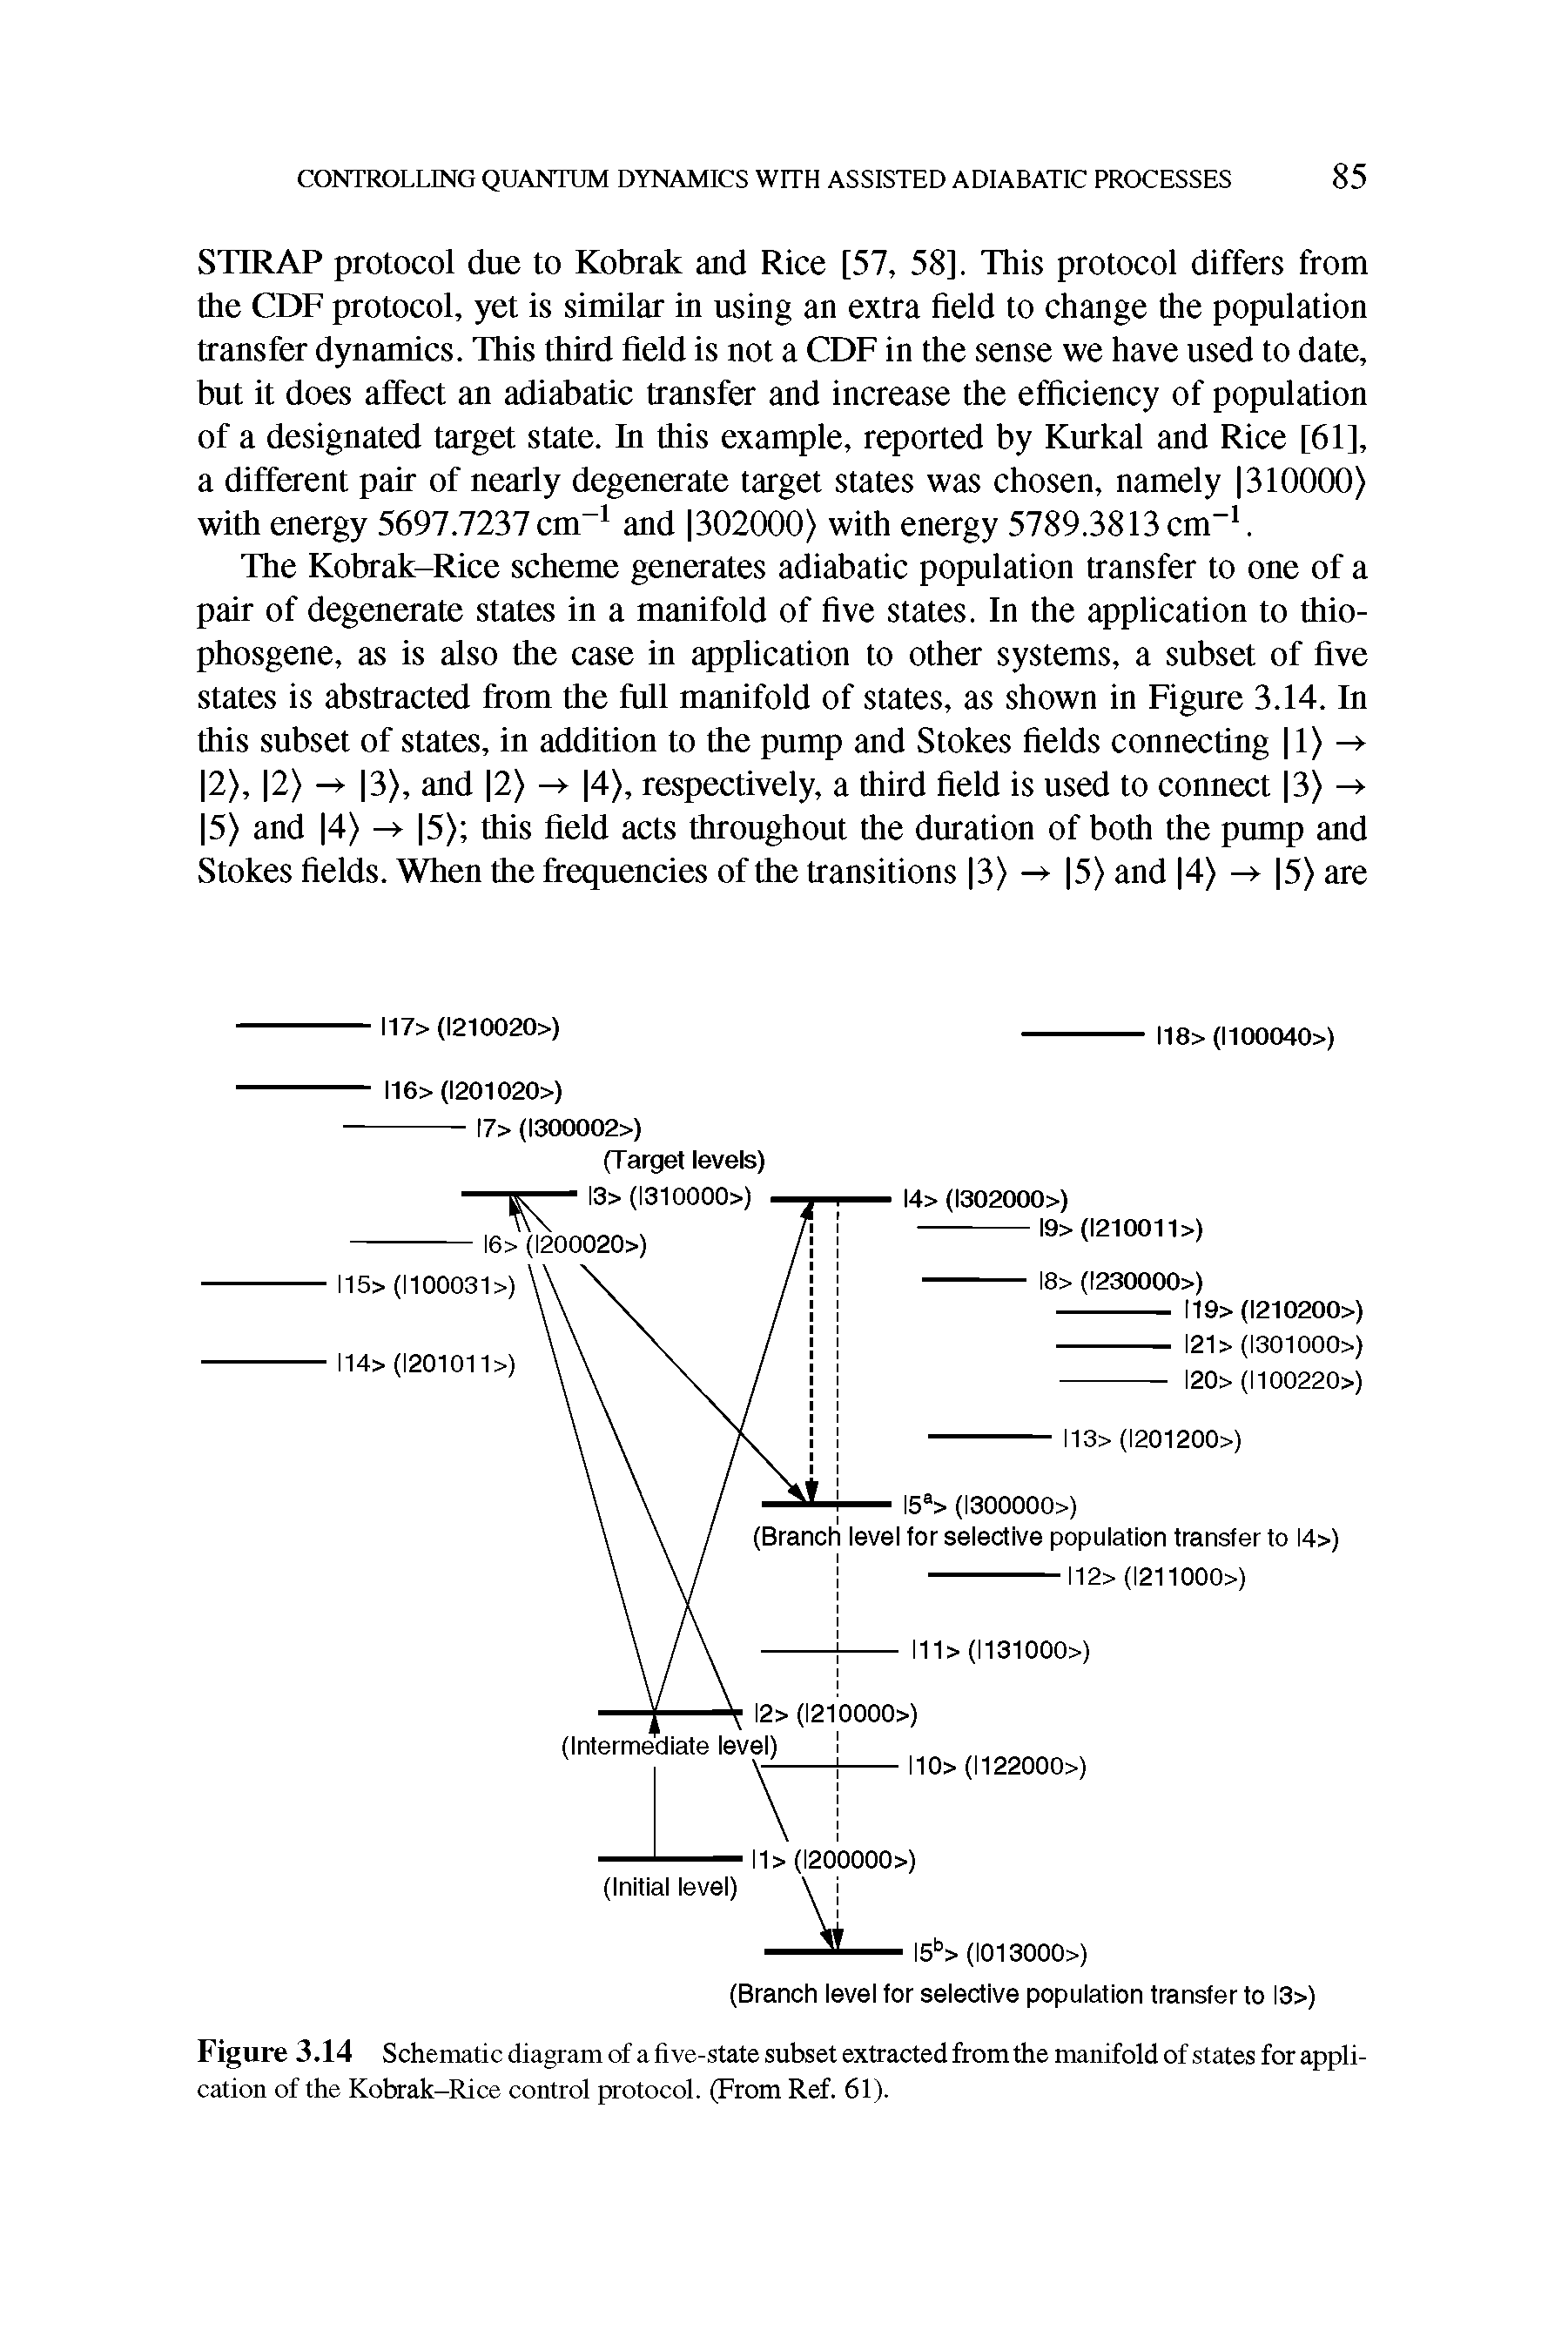 Figure 3.14 Schematic diagram of a five-state subset extracted from the manifold of states for application of the Kobrak-Rice control protocol. (From Ref. 61).